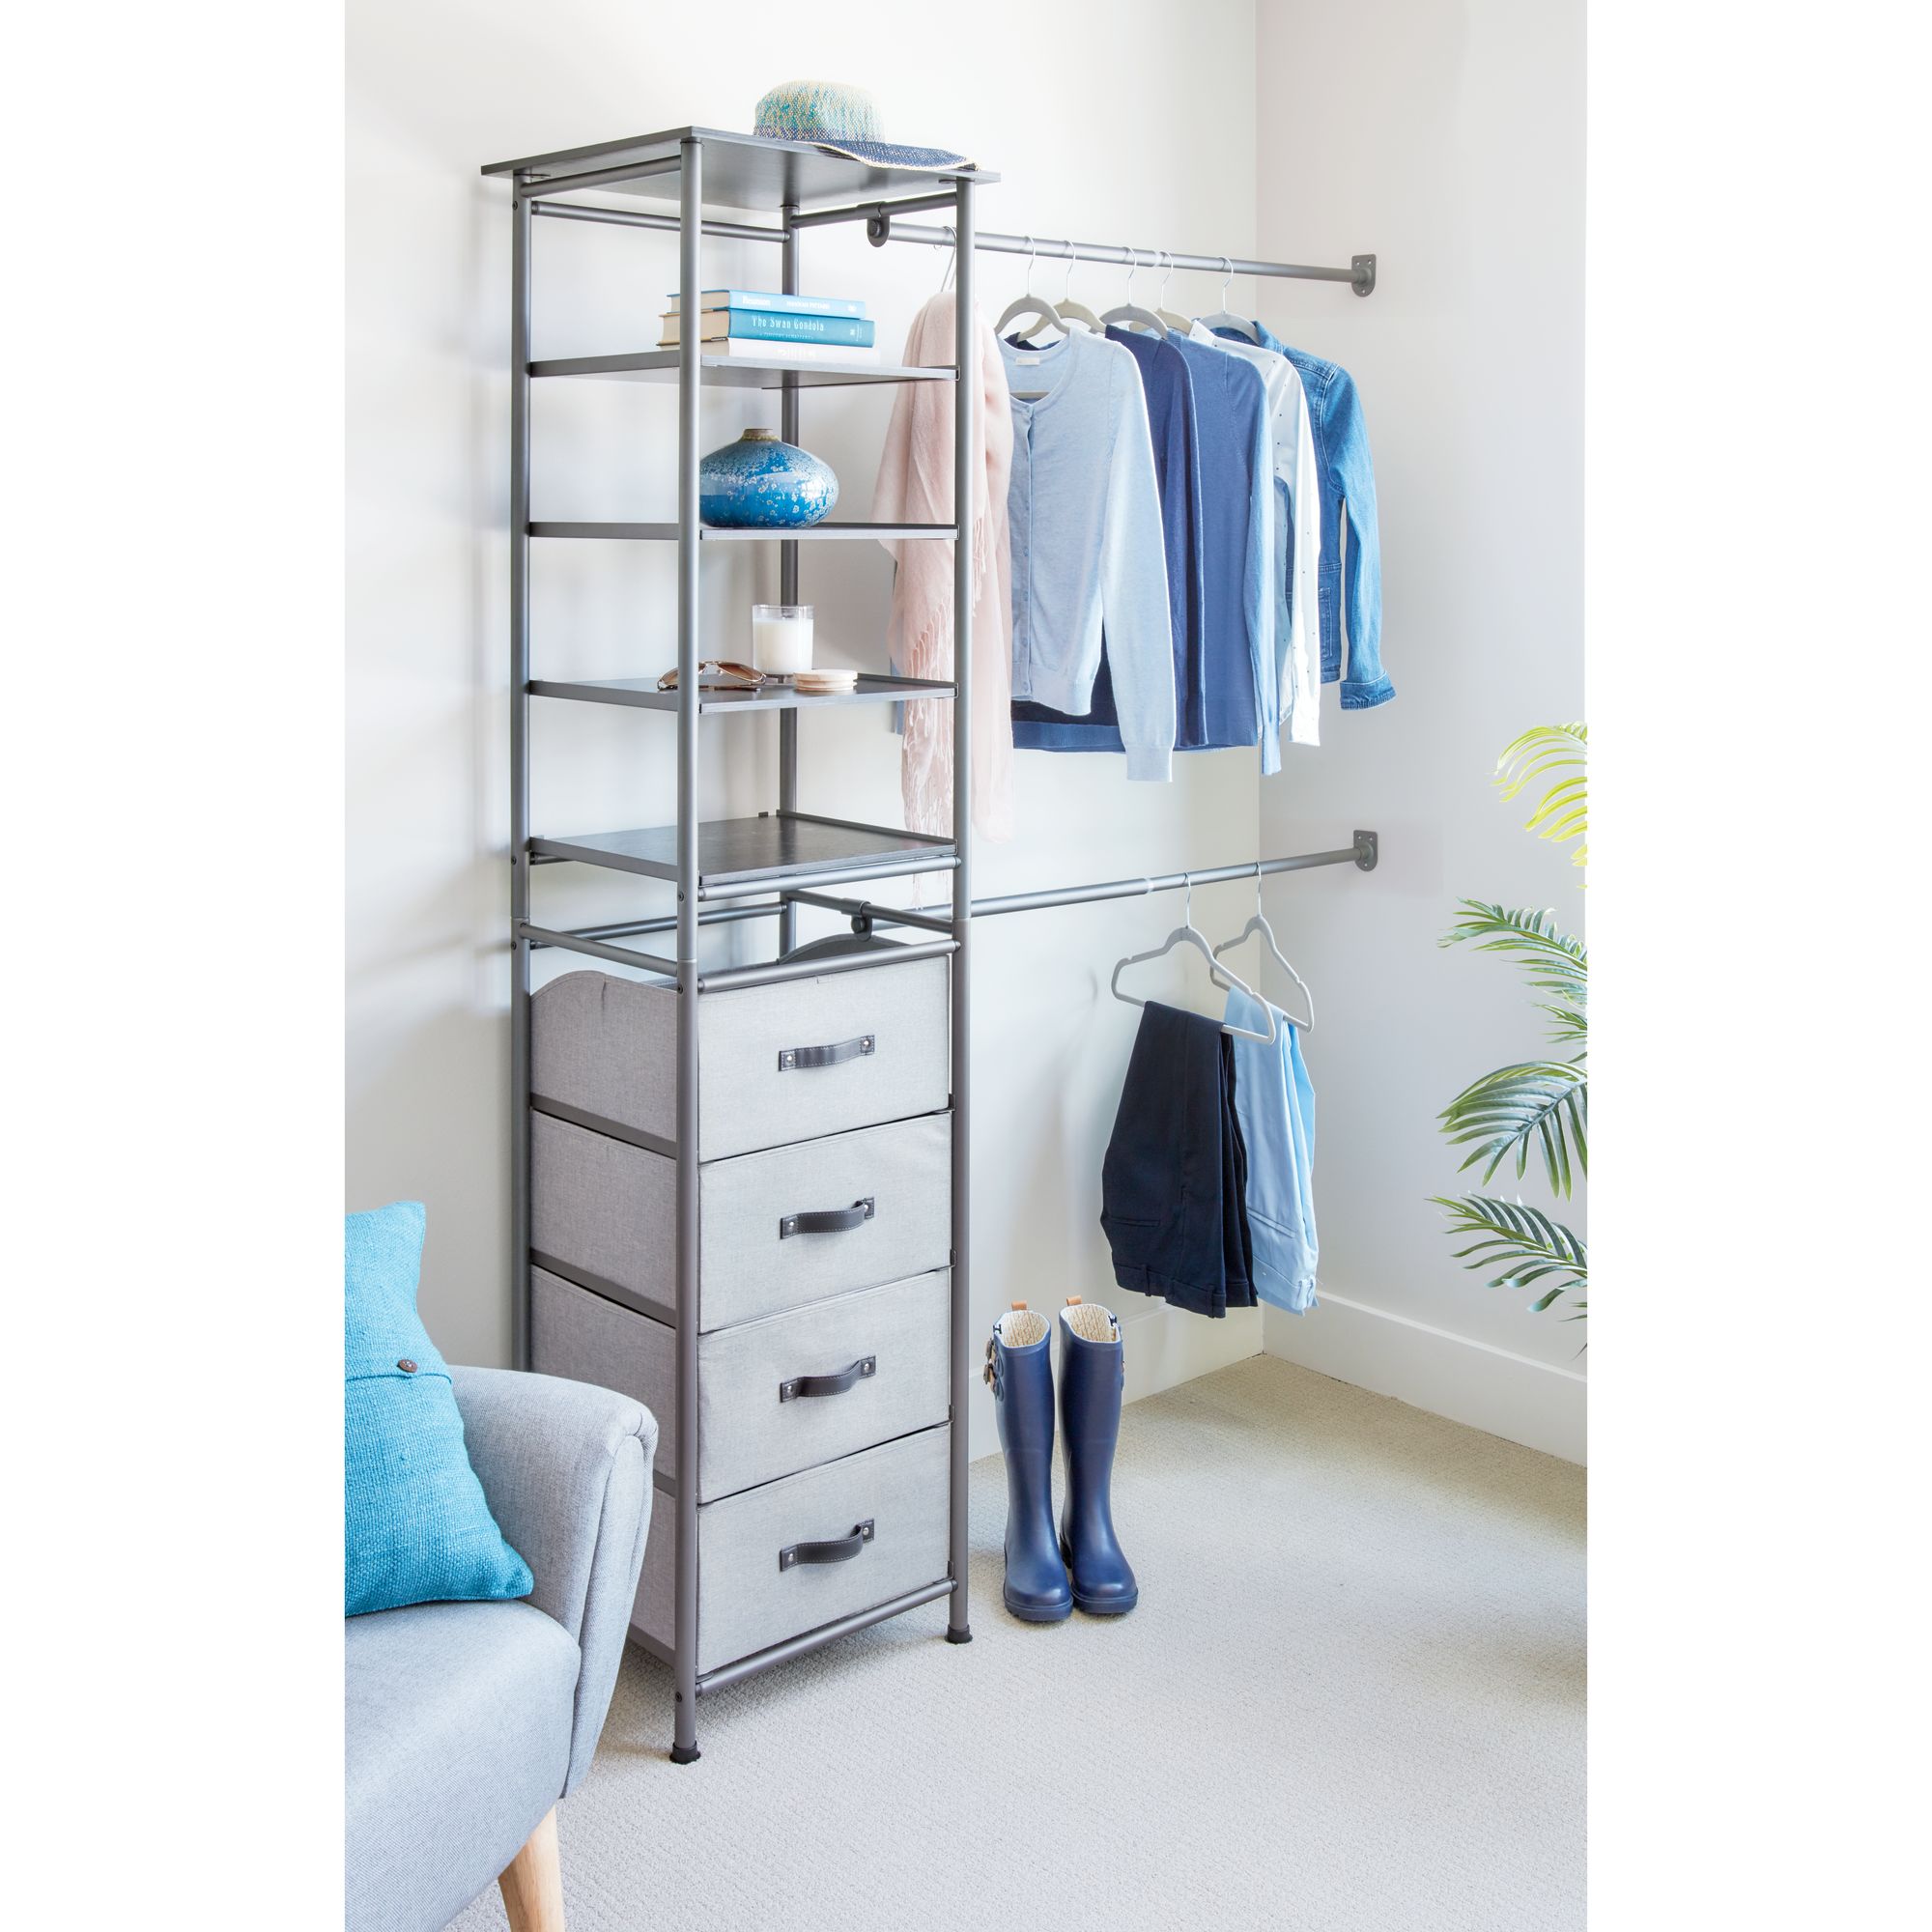 iDesign Modular Storage System, Closet with Hanging Rack, Drawers, and Shelves - Graphite - image 5 of 10